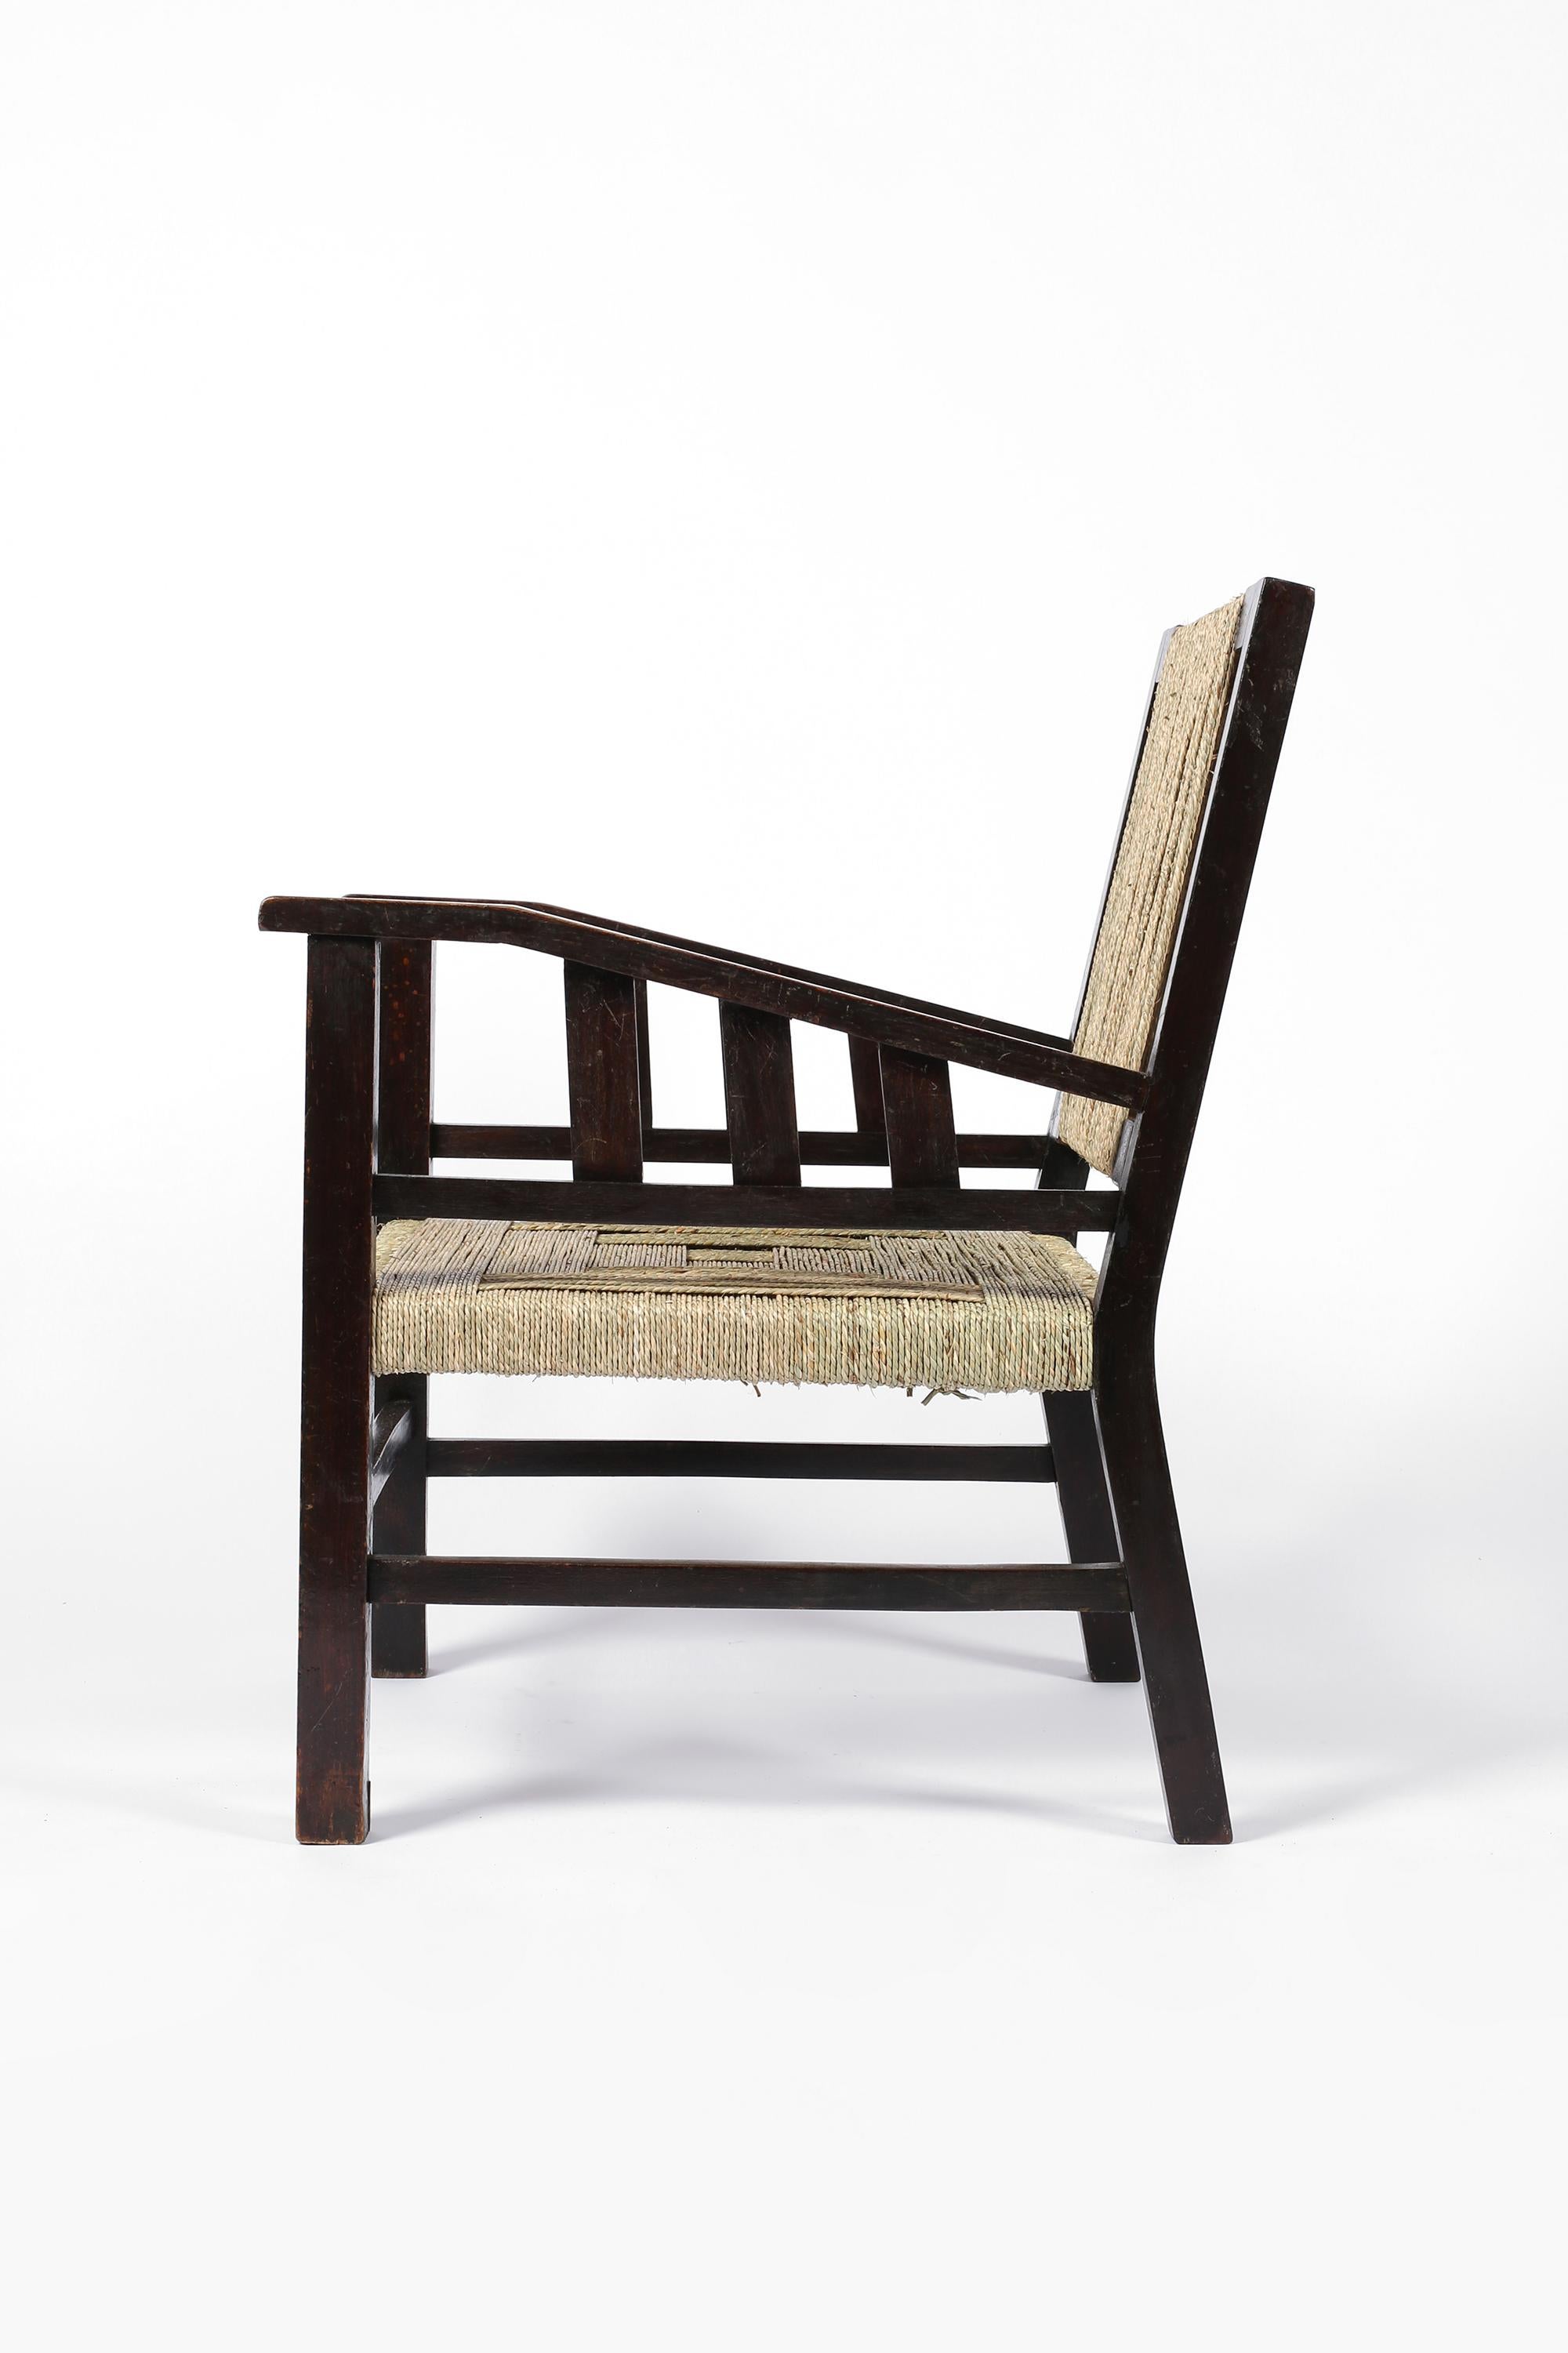 1930s French Modernist Art Deco Armchair by Francis Jourdain in Beech and Rope In Good Condition For Sale In London, GB